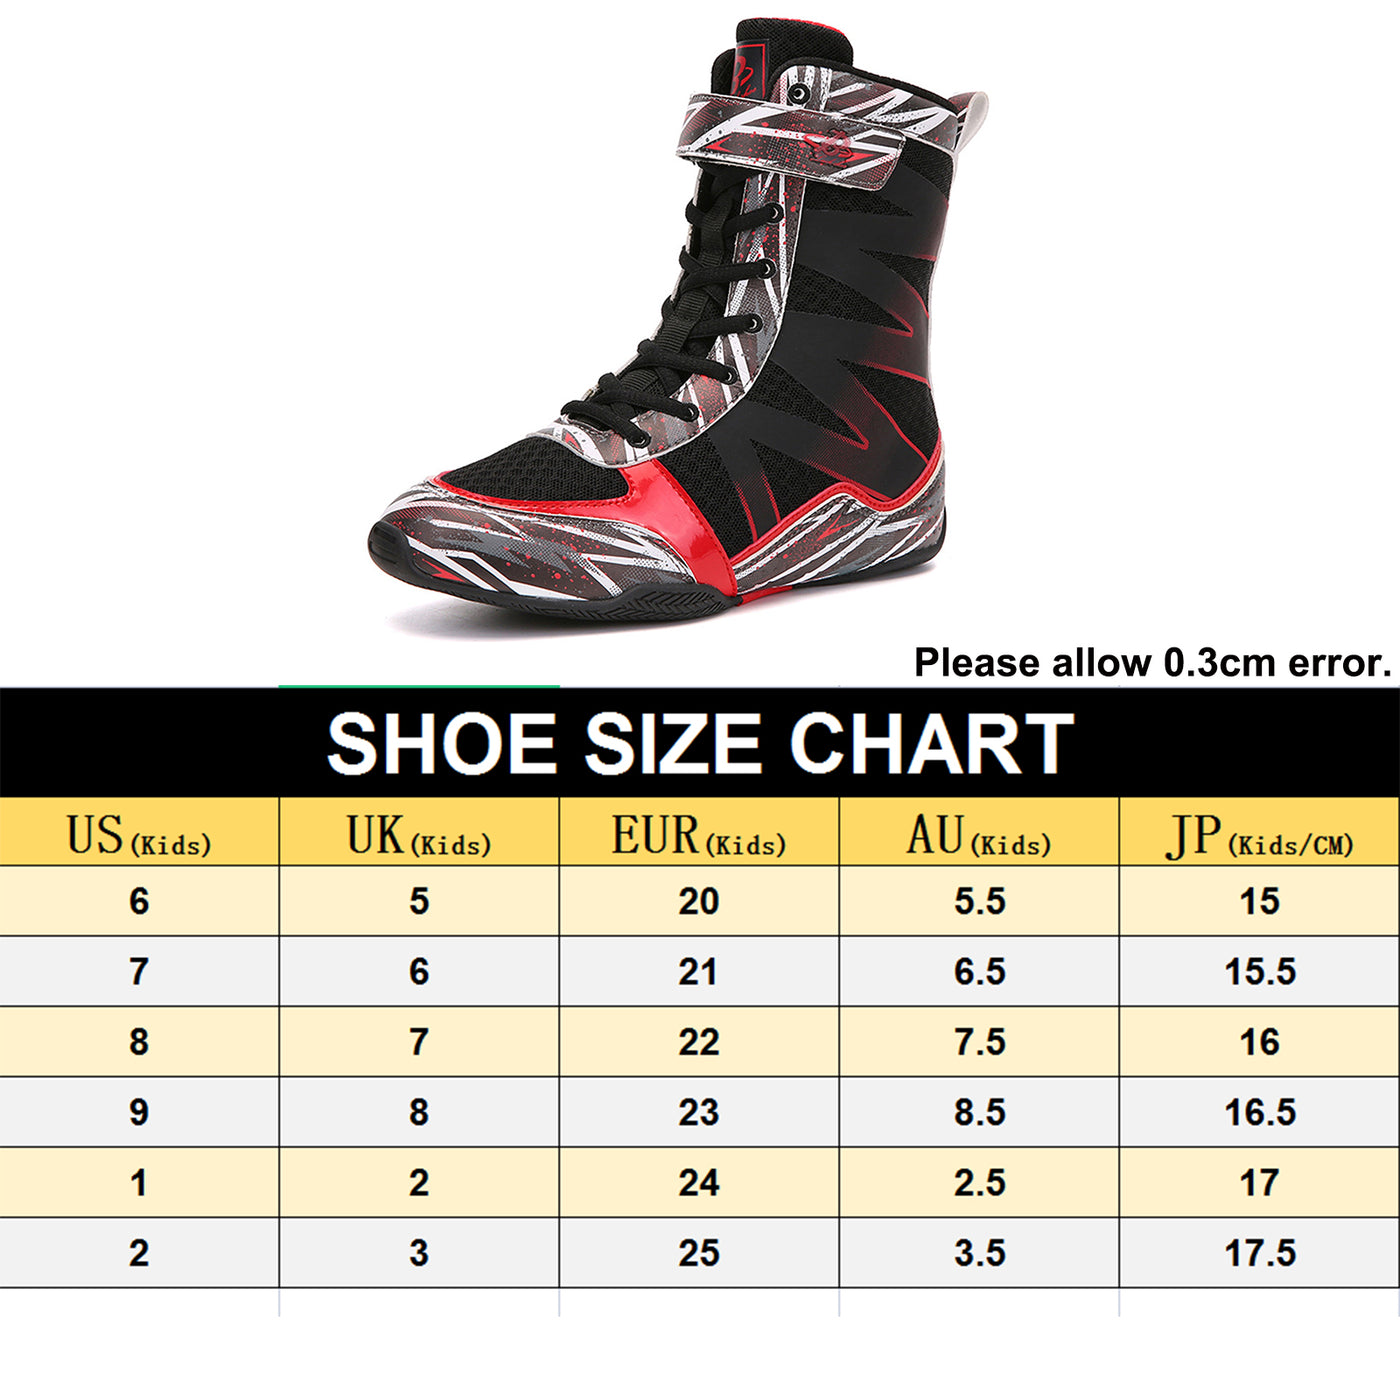 B LUCK SHOE Boxing Shoes for Kids, Youth Boxing Boots Hi-top Breathable Wrestling Shoes LS-218 BLACK